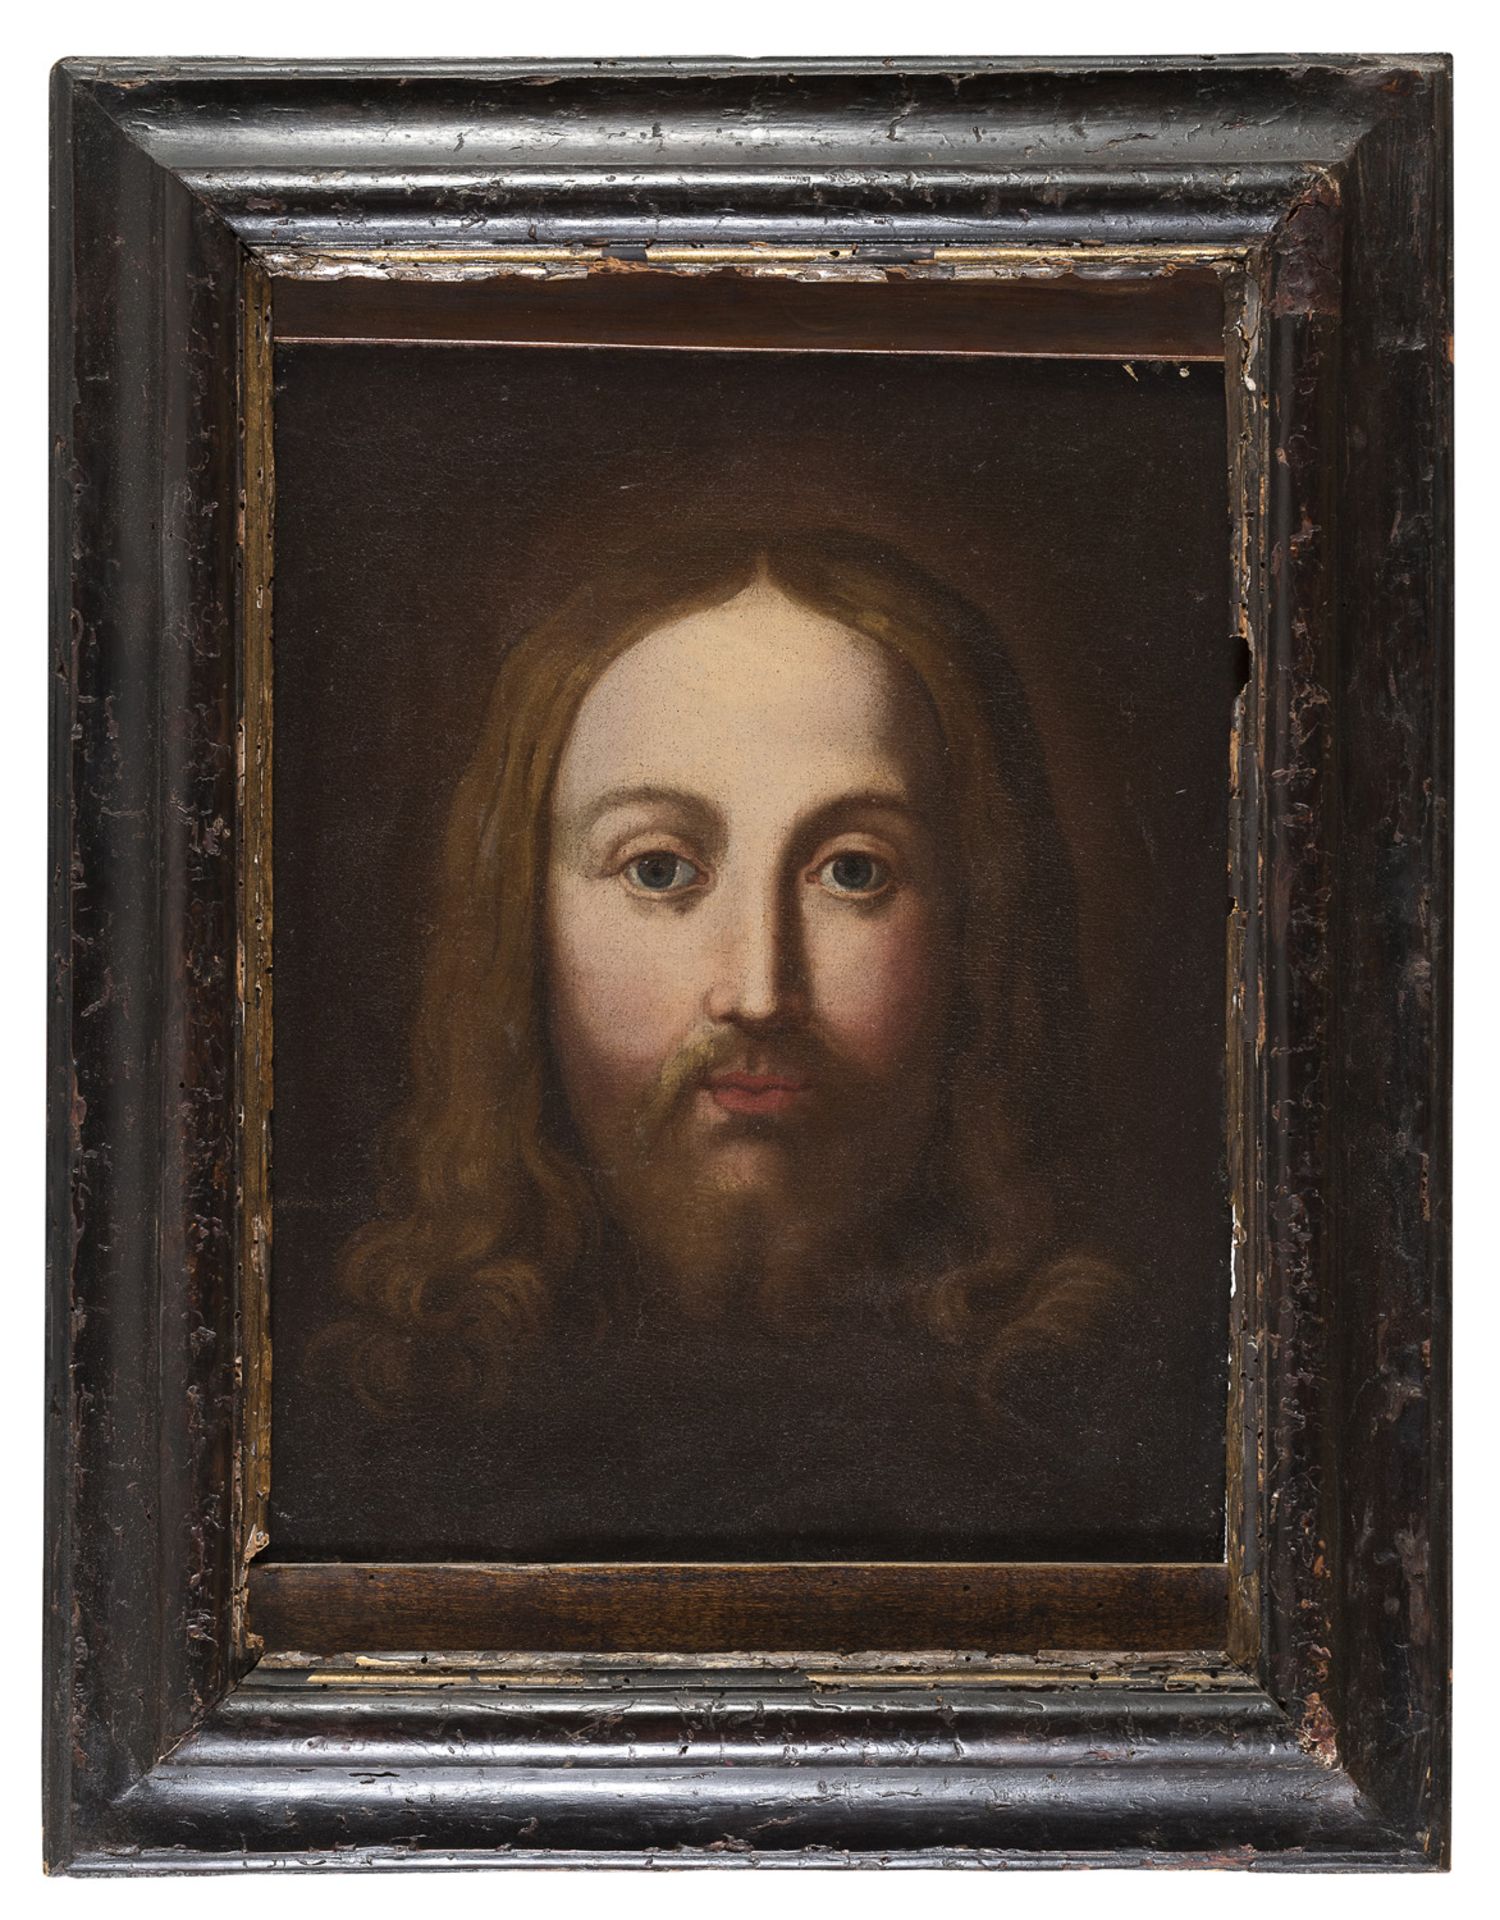 LOMBARD PAINTER LATE 16TH - EARLY 17TH CENTURY